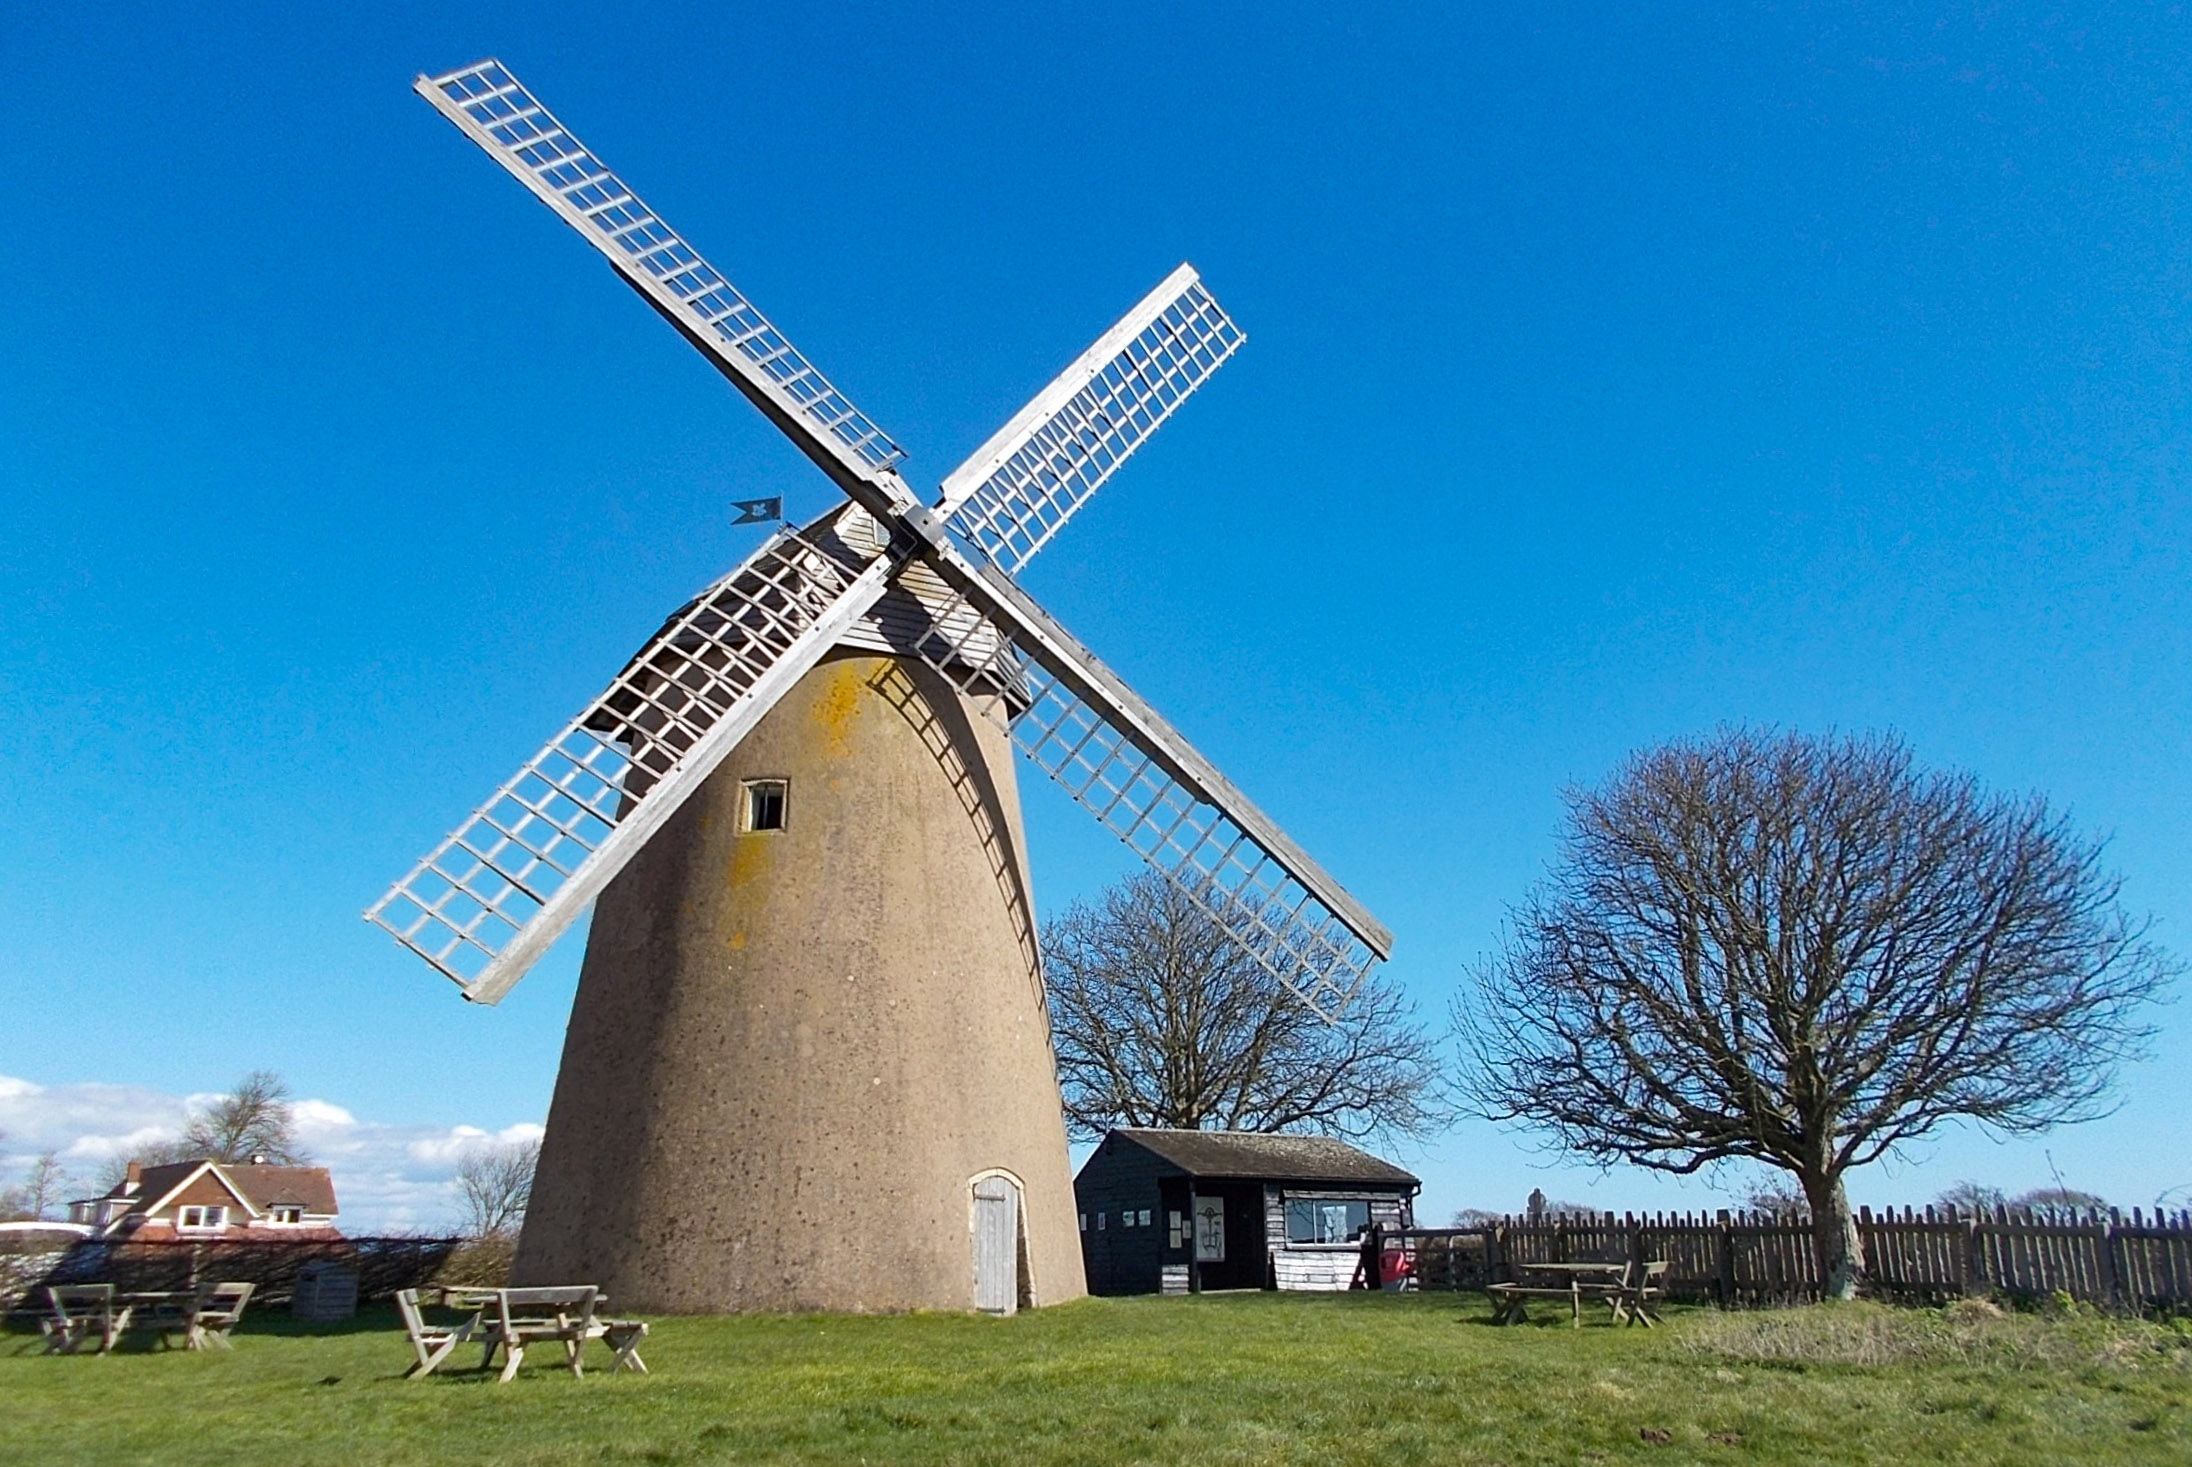 Ile de Wight - Bembridge Windmill © Mypix - licence [CC BY-SA 4.0] from Wikimedia Commons